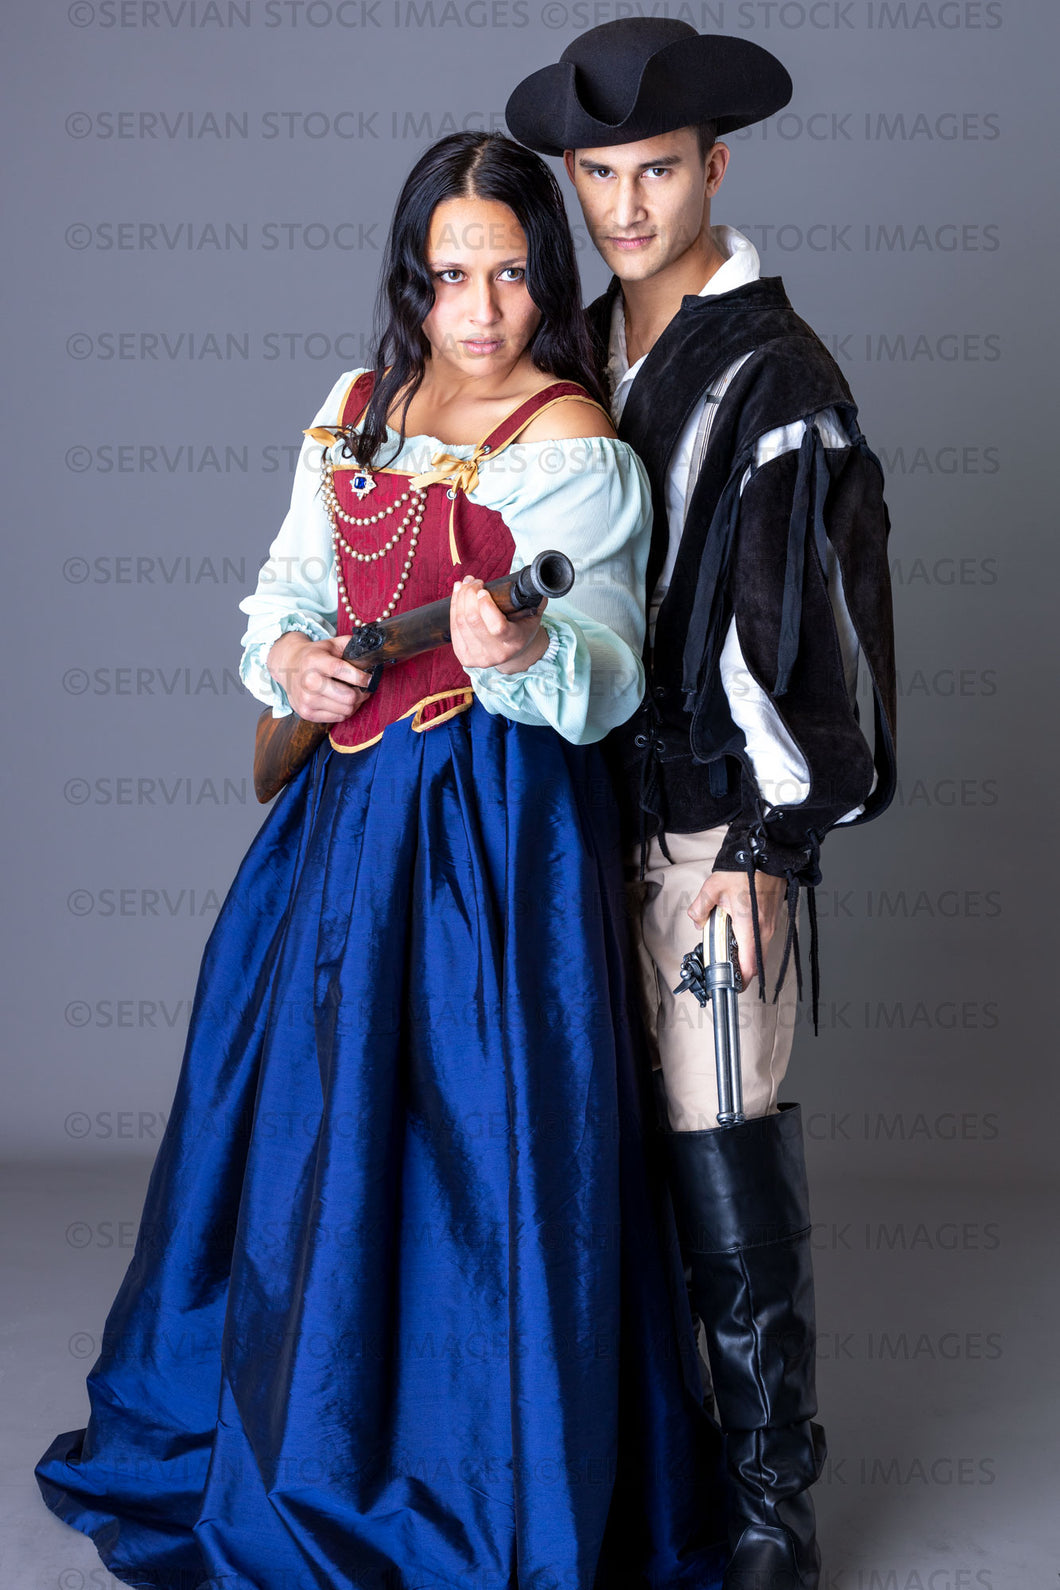 Pirate couple holding weapons against a grey backdrop (Sylvia and Lukas 6023)